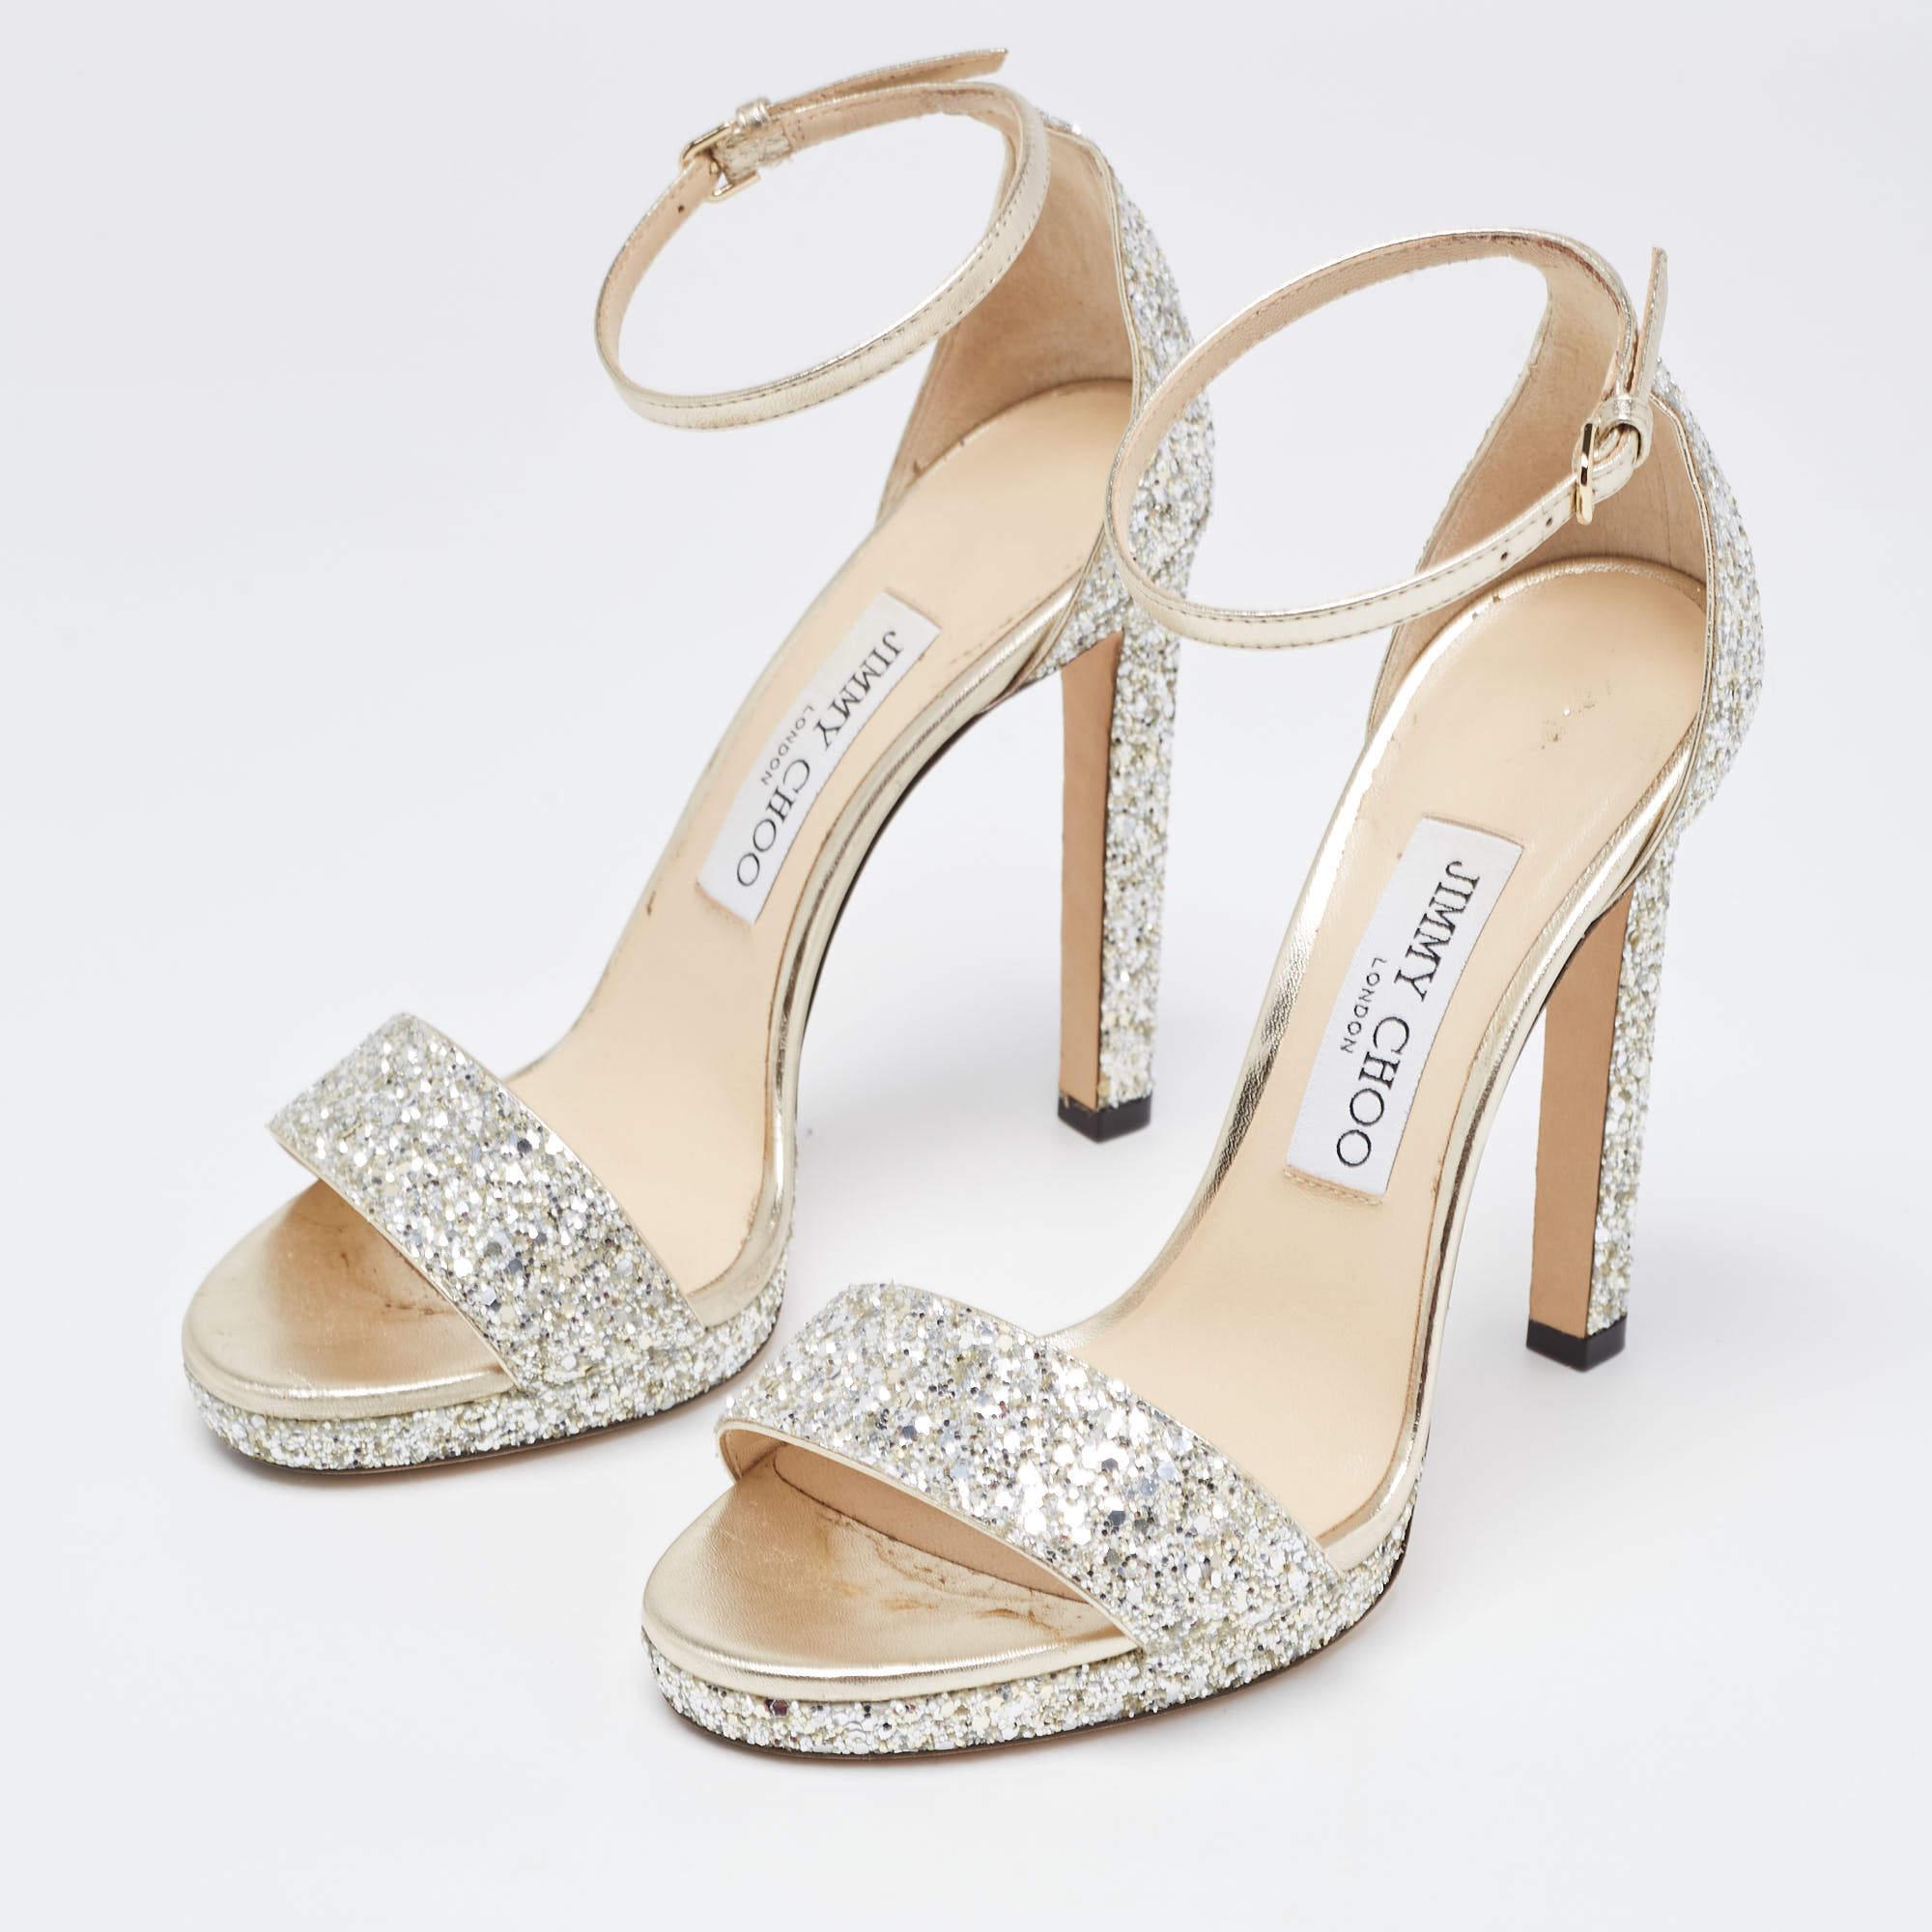 Women's Jimmy Choo Silver/Gold Glitter and Leather Misty Ankle Strap Sandals Size 37